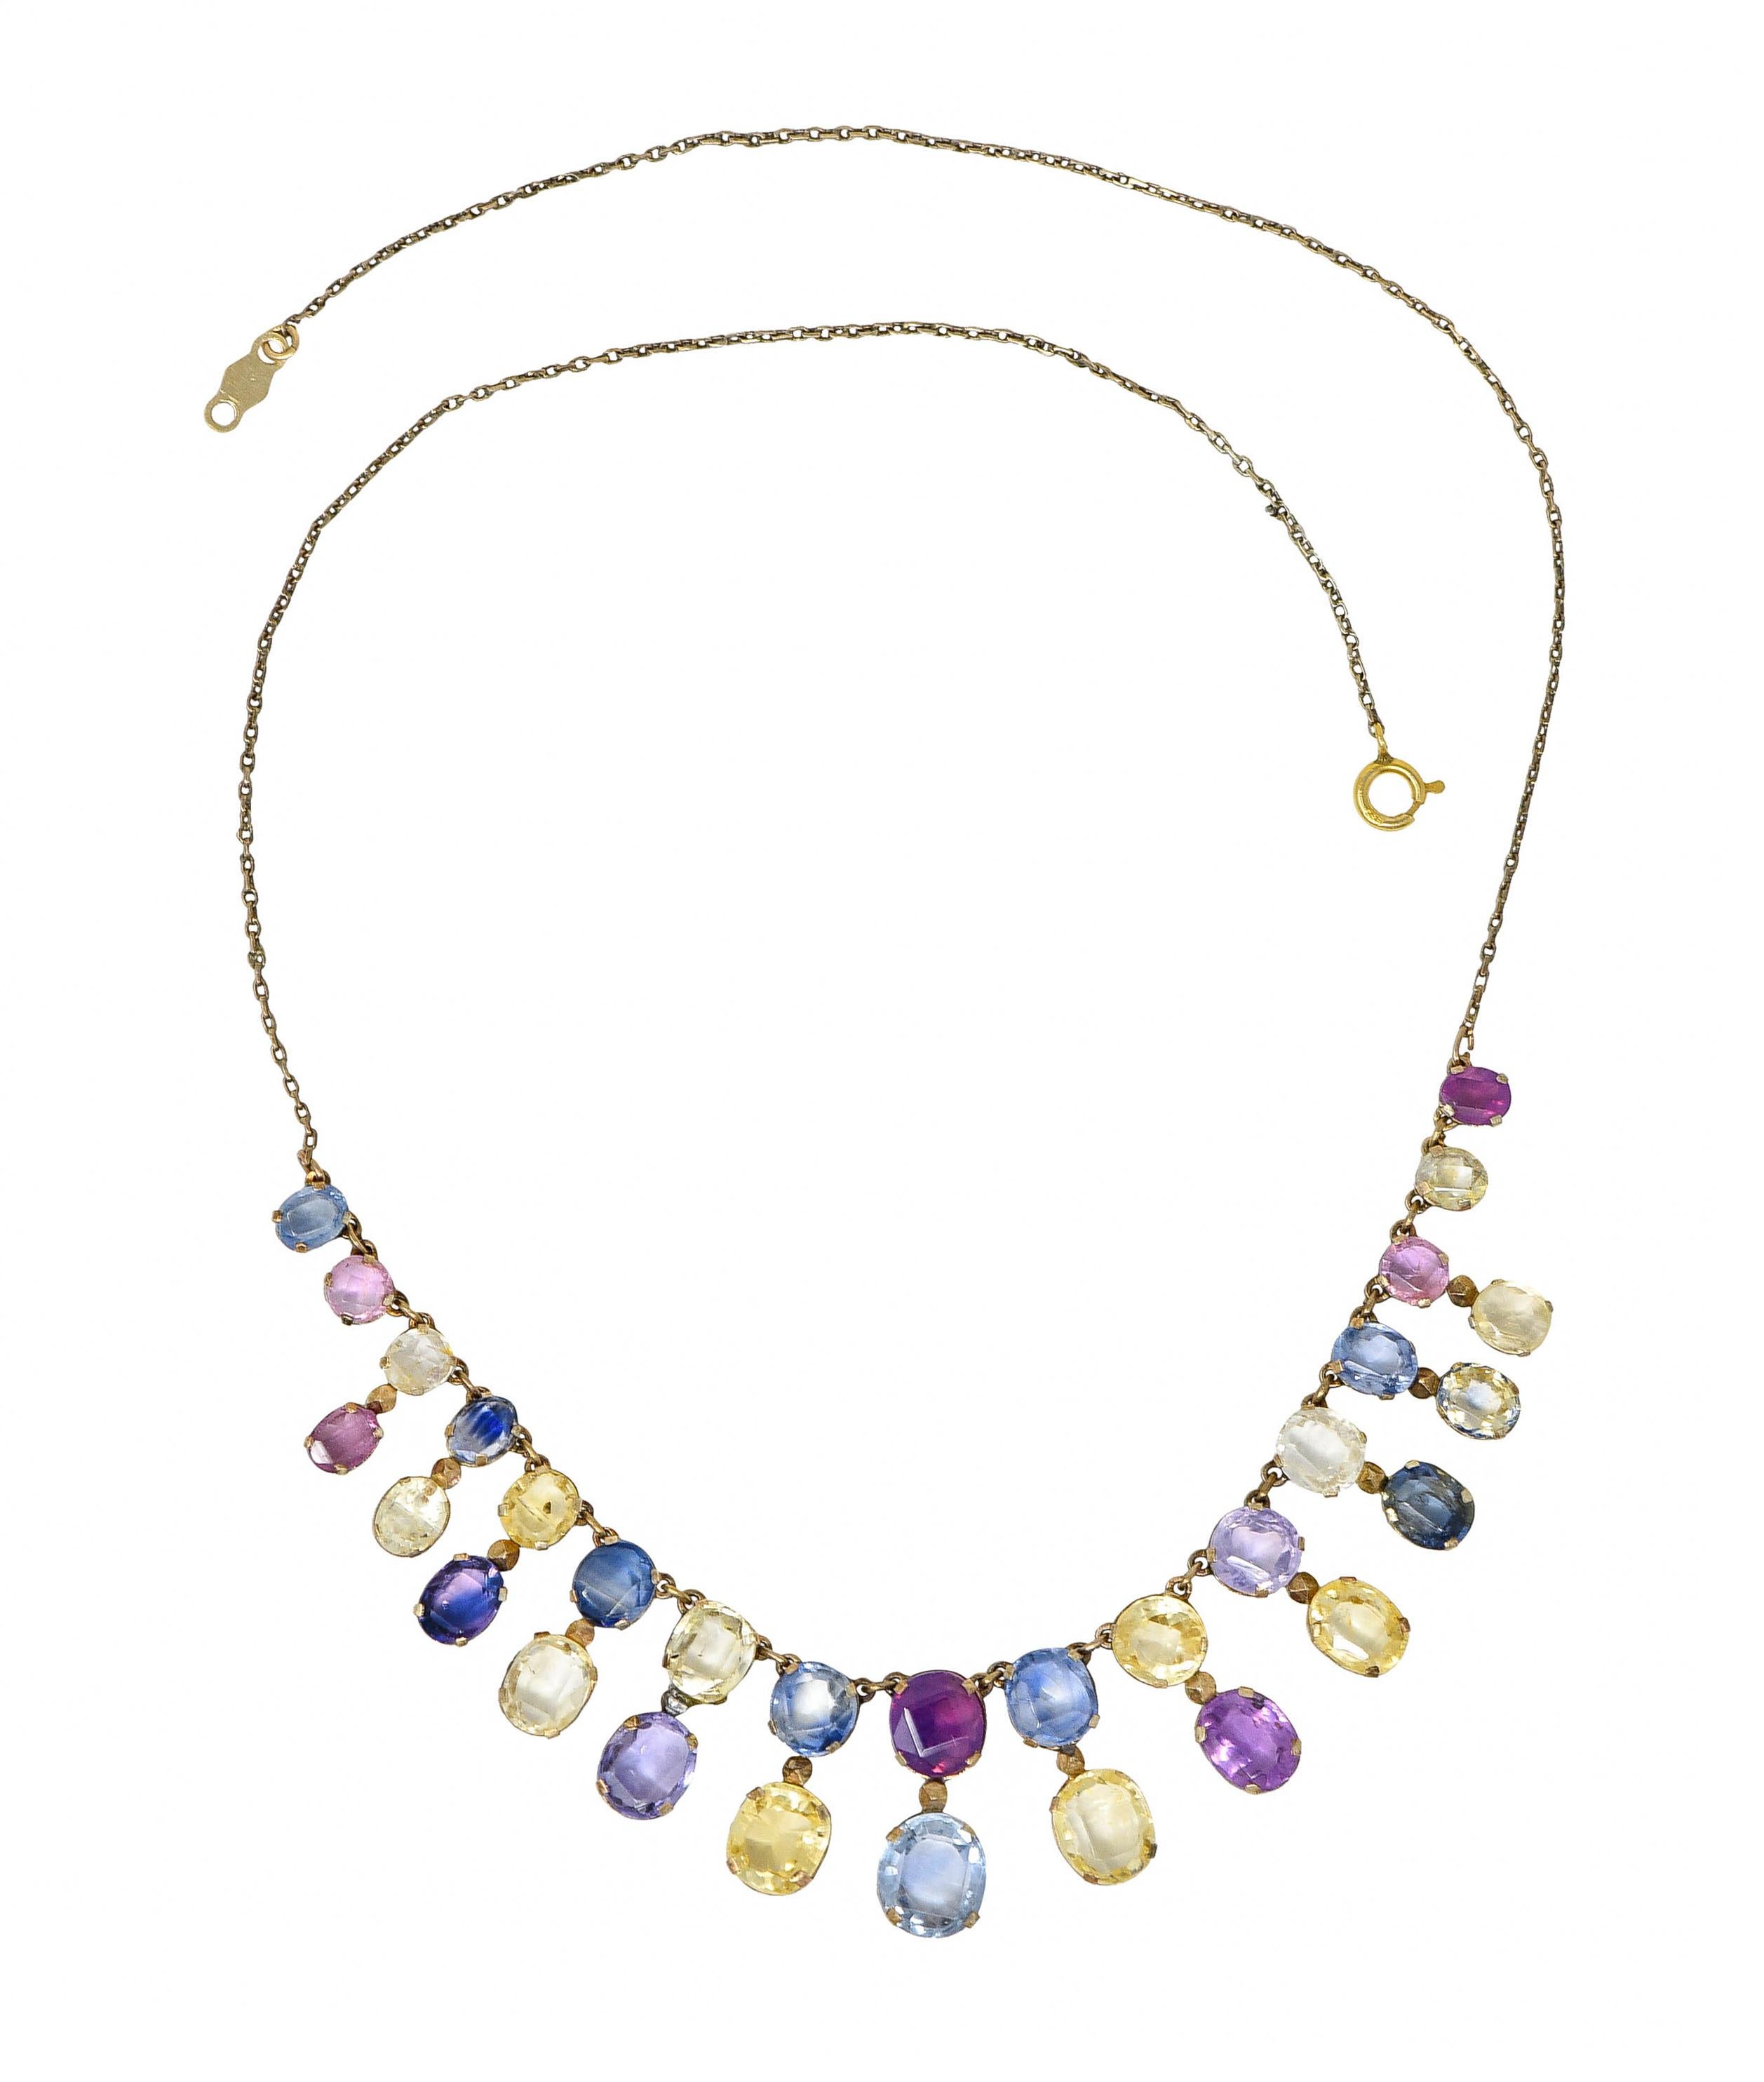 Cable chain necklace features oval, round, and cushion cut sapphires as fringe droplets

Transparent to translucent with pastel to medium light color

Pink, yellow, blue, and lavender with some exhibiting bi-color saturation

Weighing in total